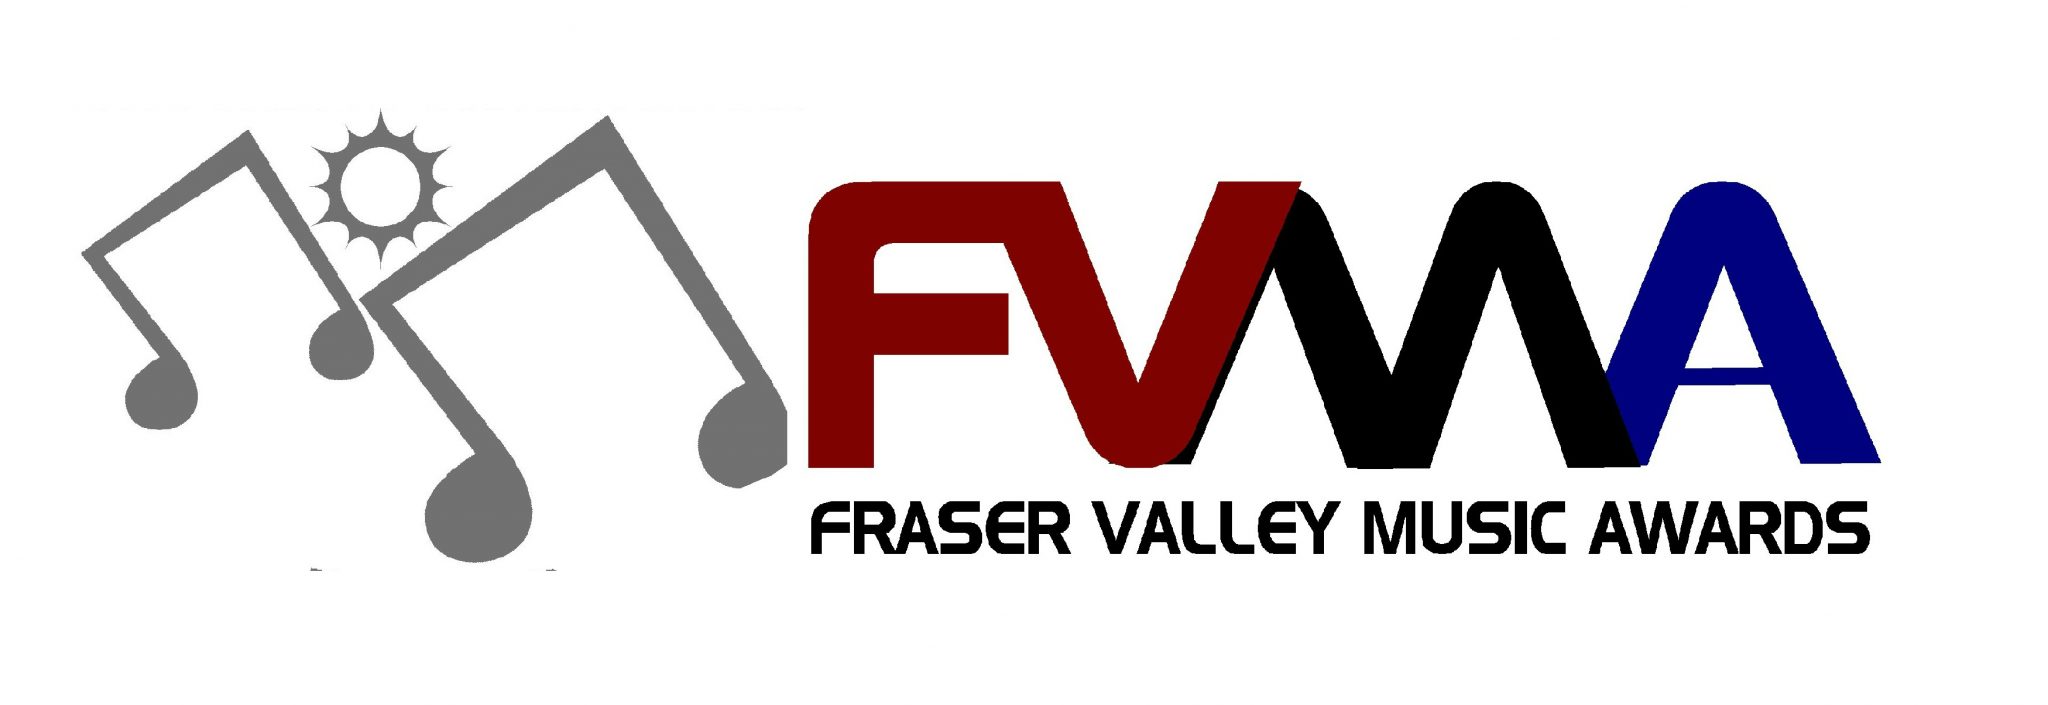 2018 FRASER VALLEY MUSIC AWARDS APPLICATIONS NOW OPEN